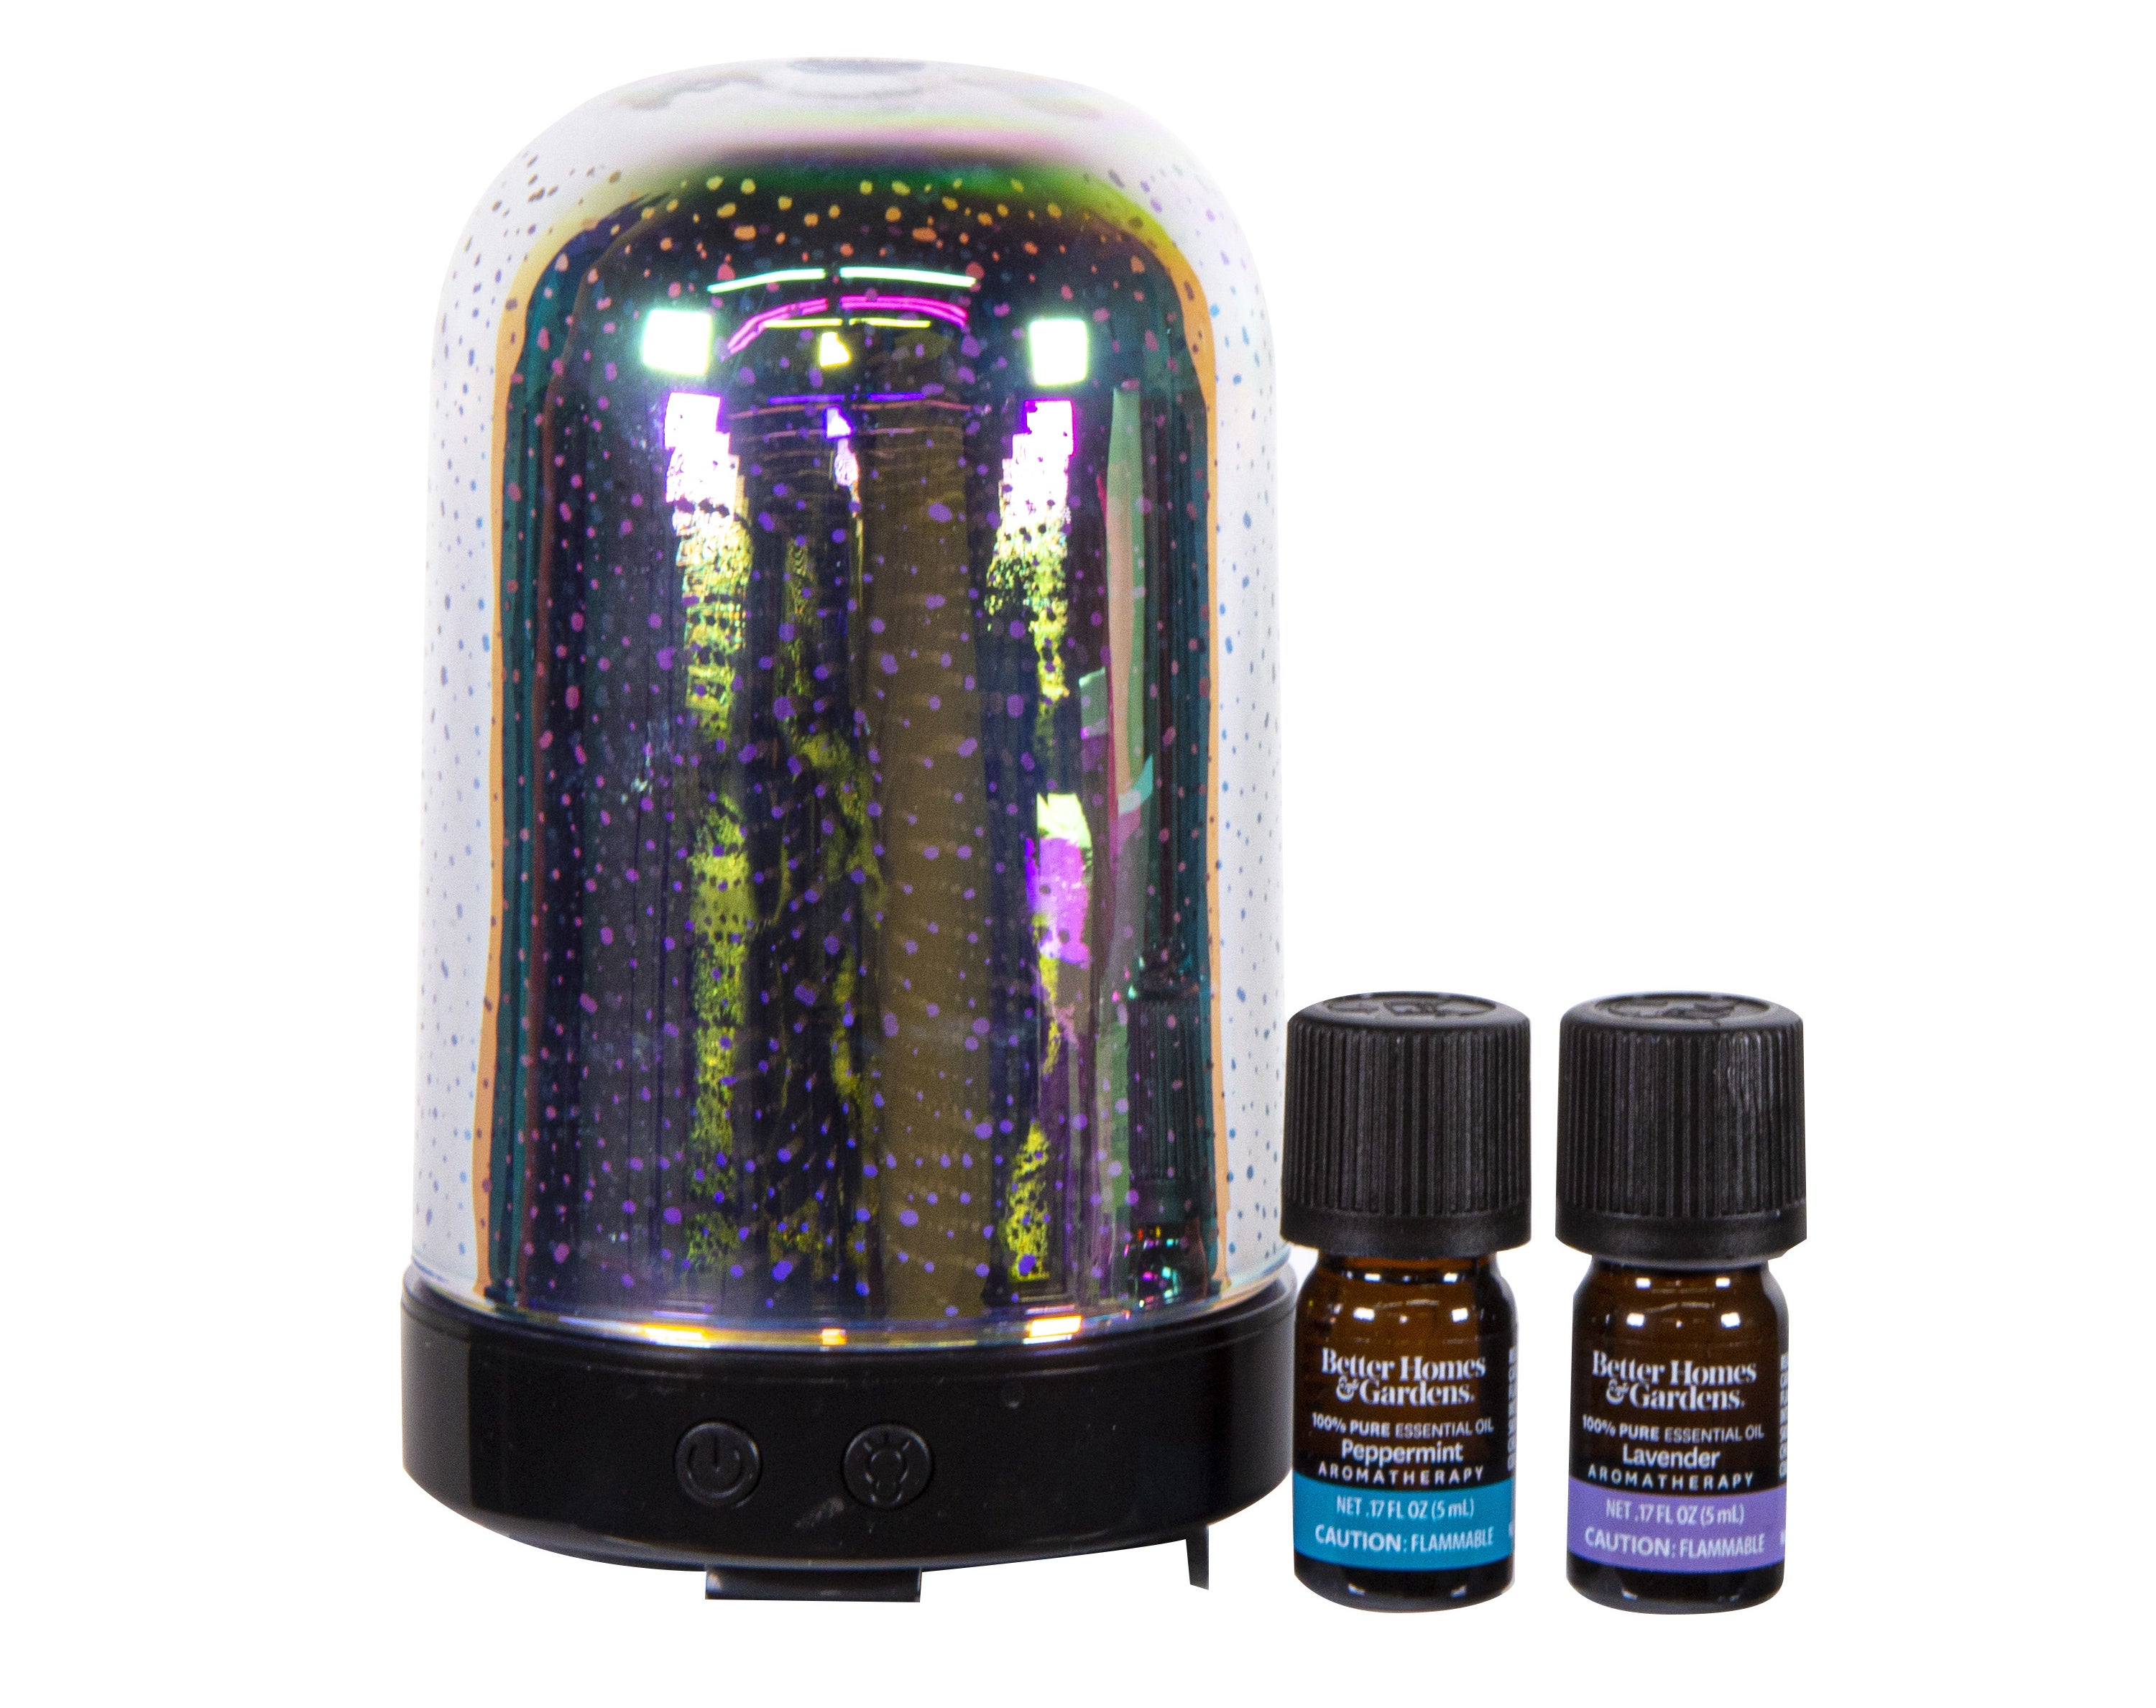 A rainbow- colored diffuser with oils